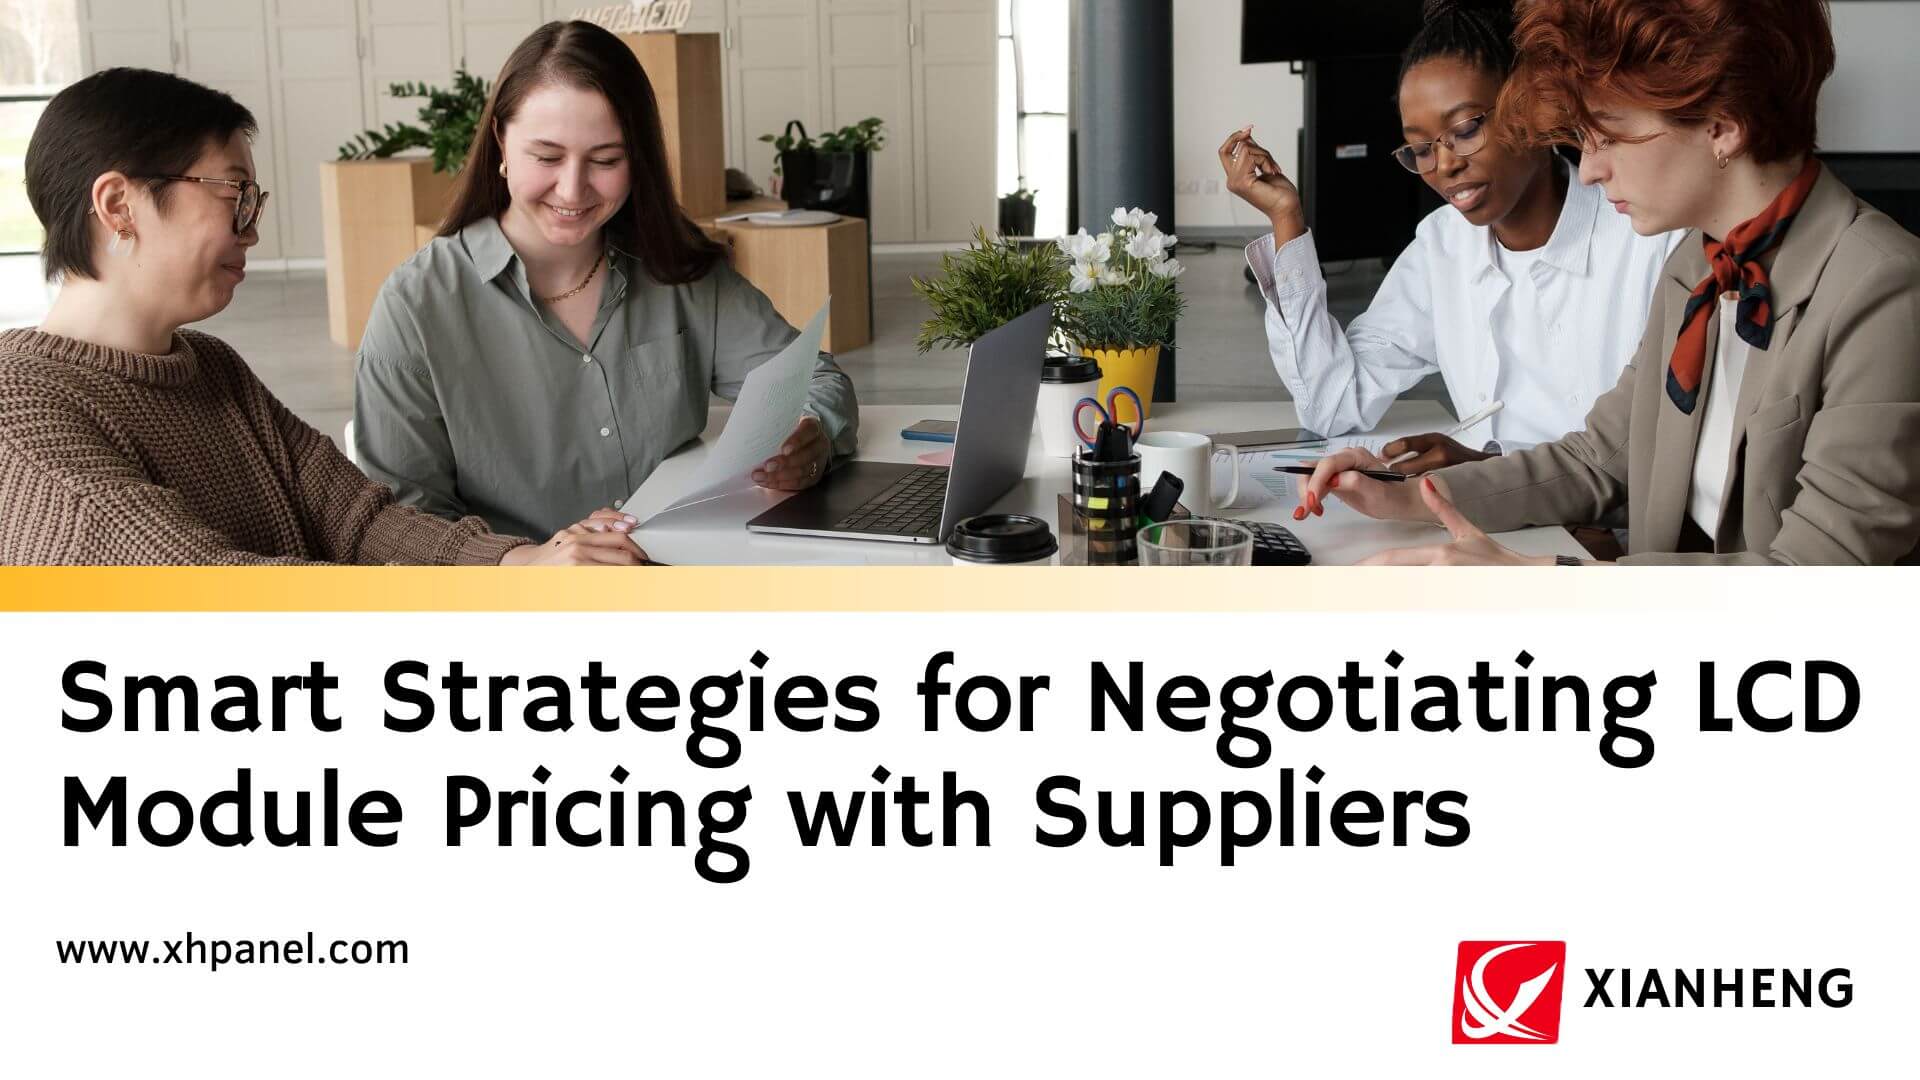 Smart Strategies for Negotiating LCD Module Pricing with Suppliers